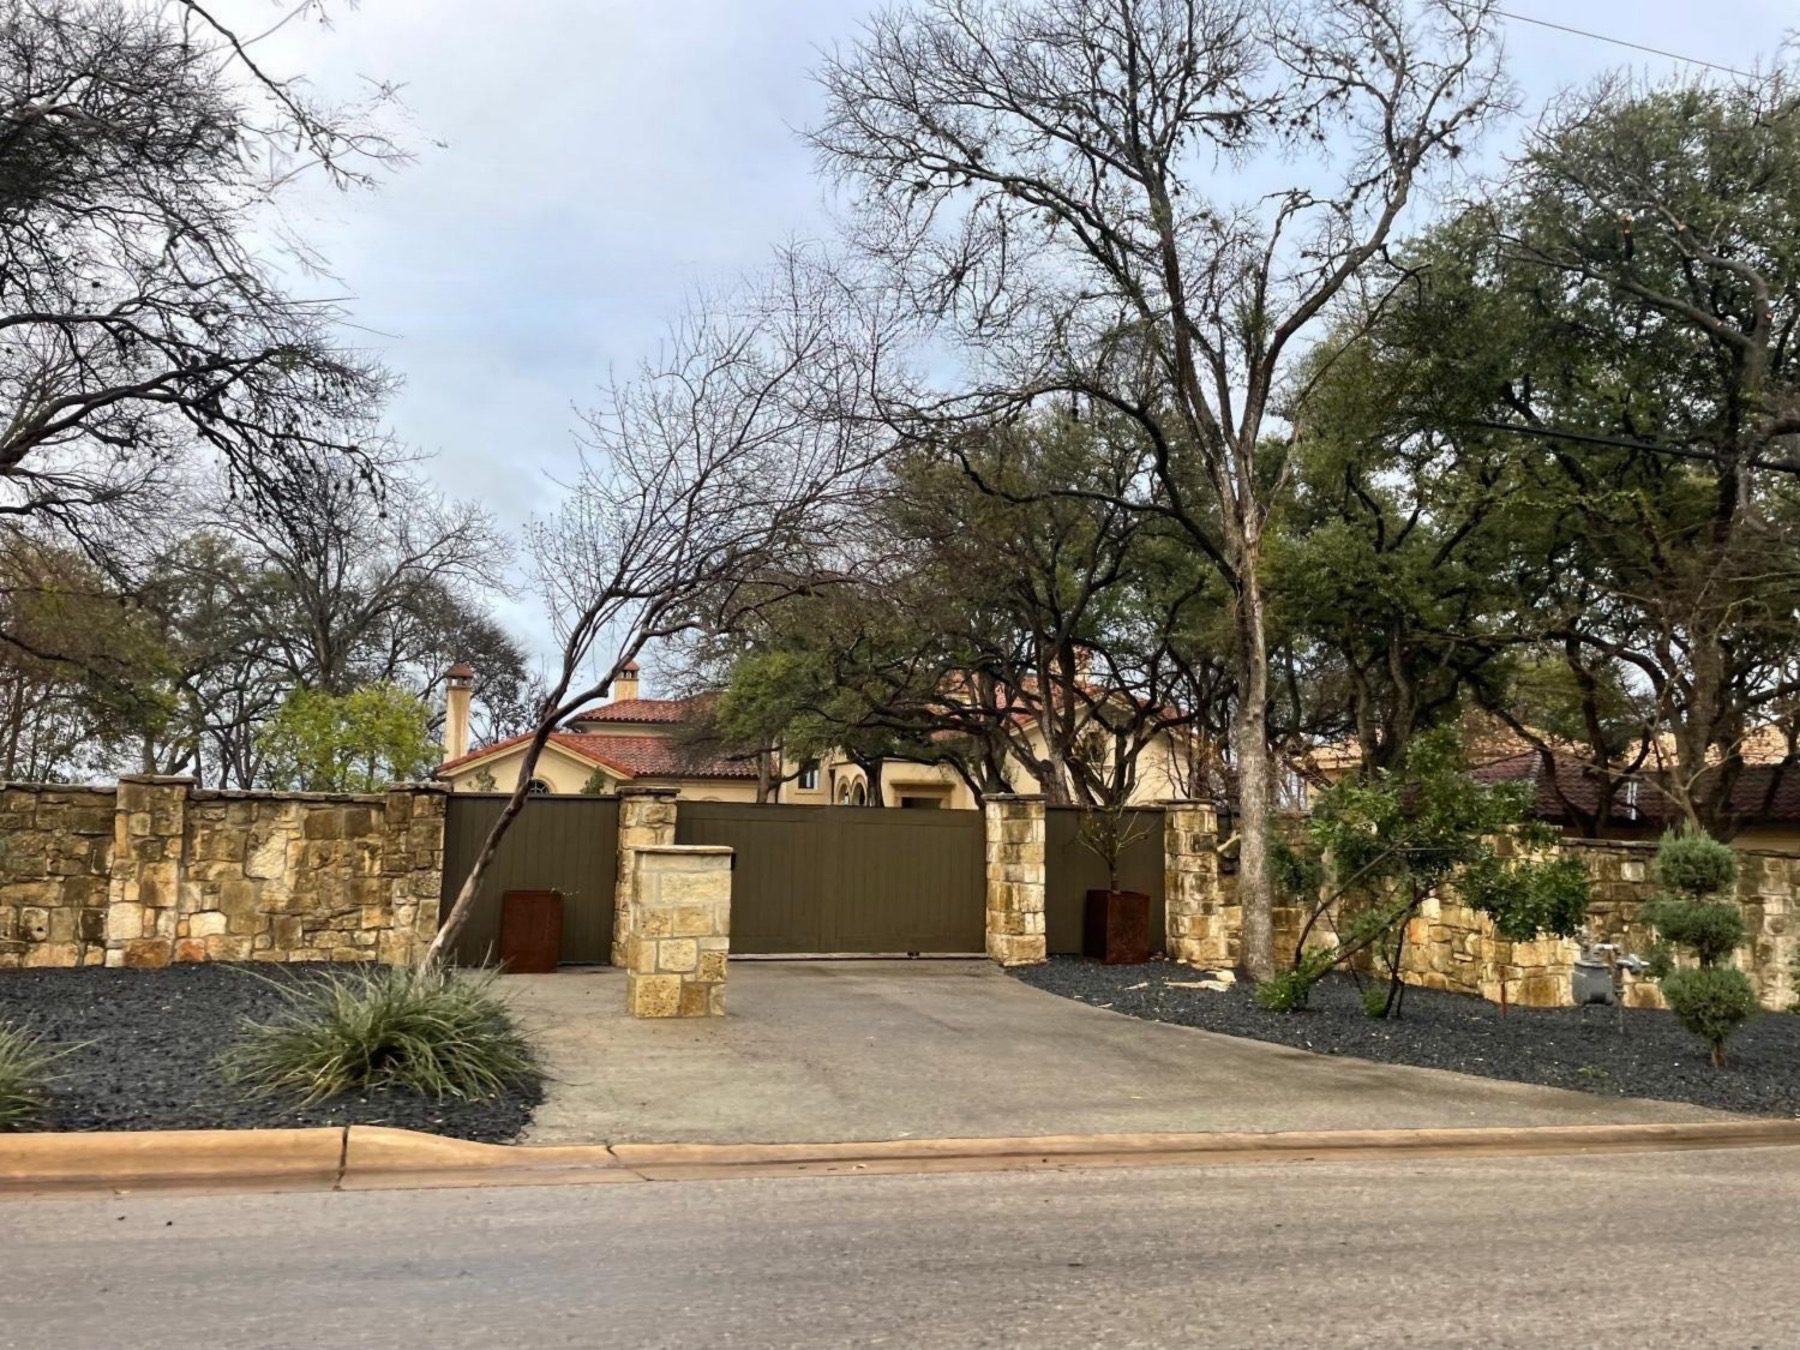 most expensive neighborhoods in Austin bluffington